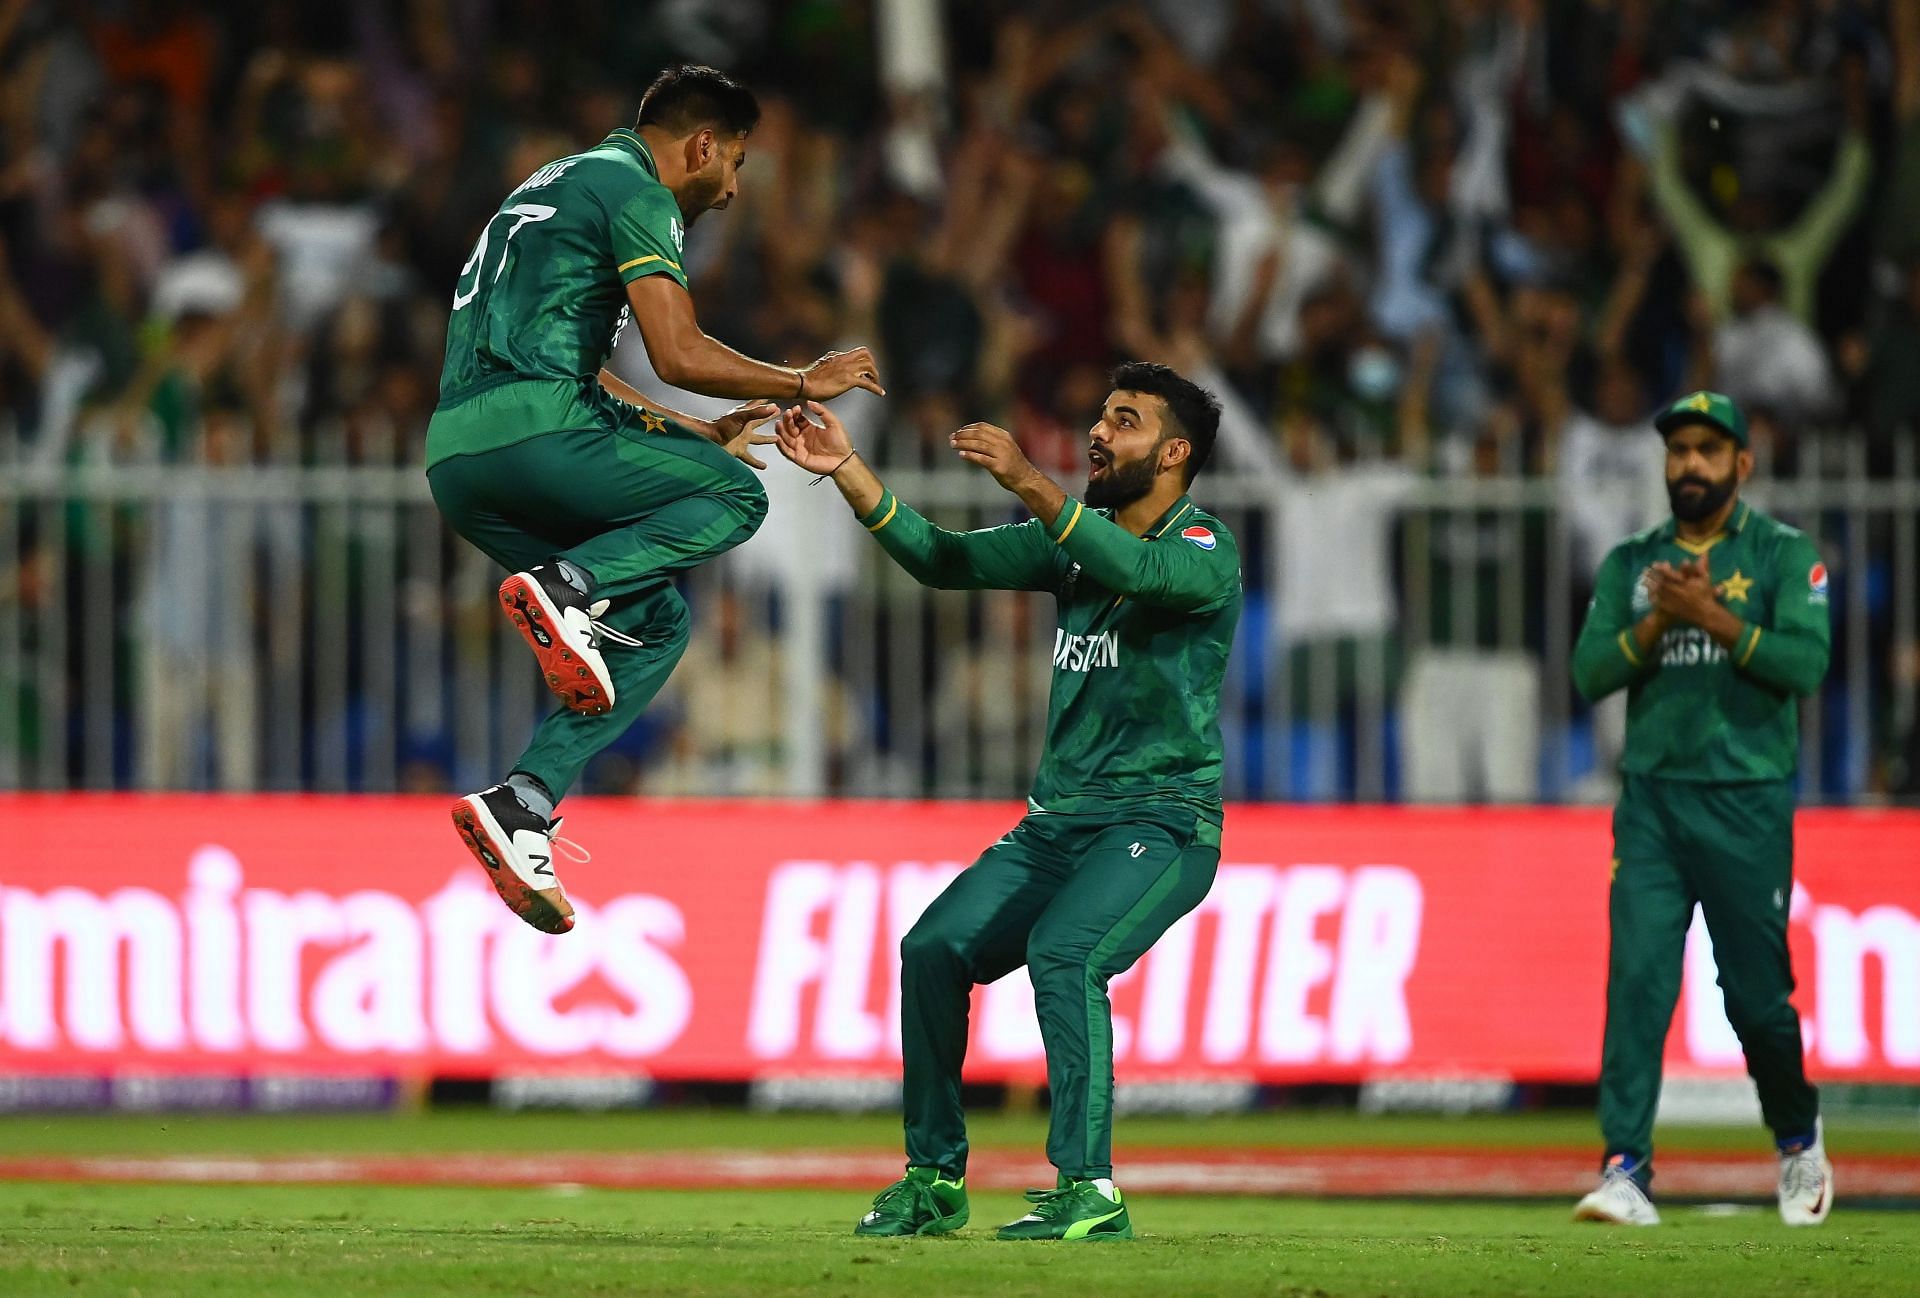 Pakistan have dished out all-round performances in both their matches